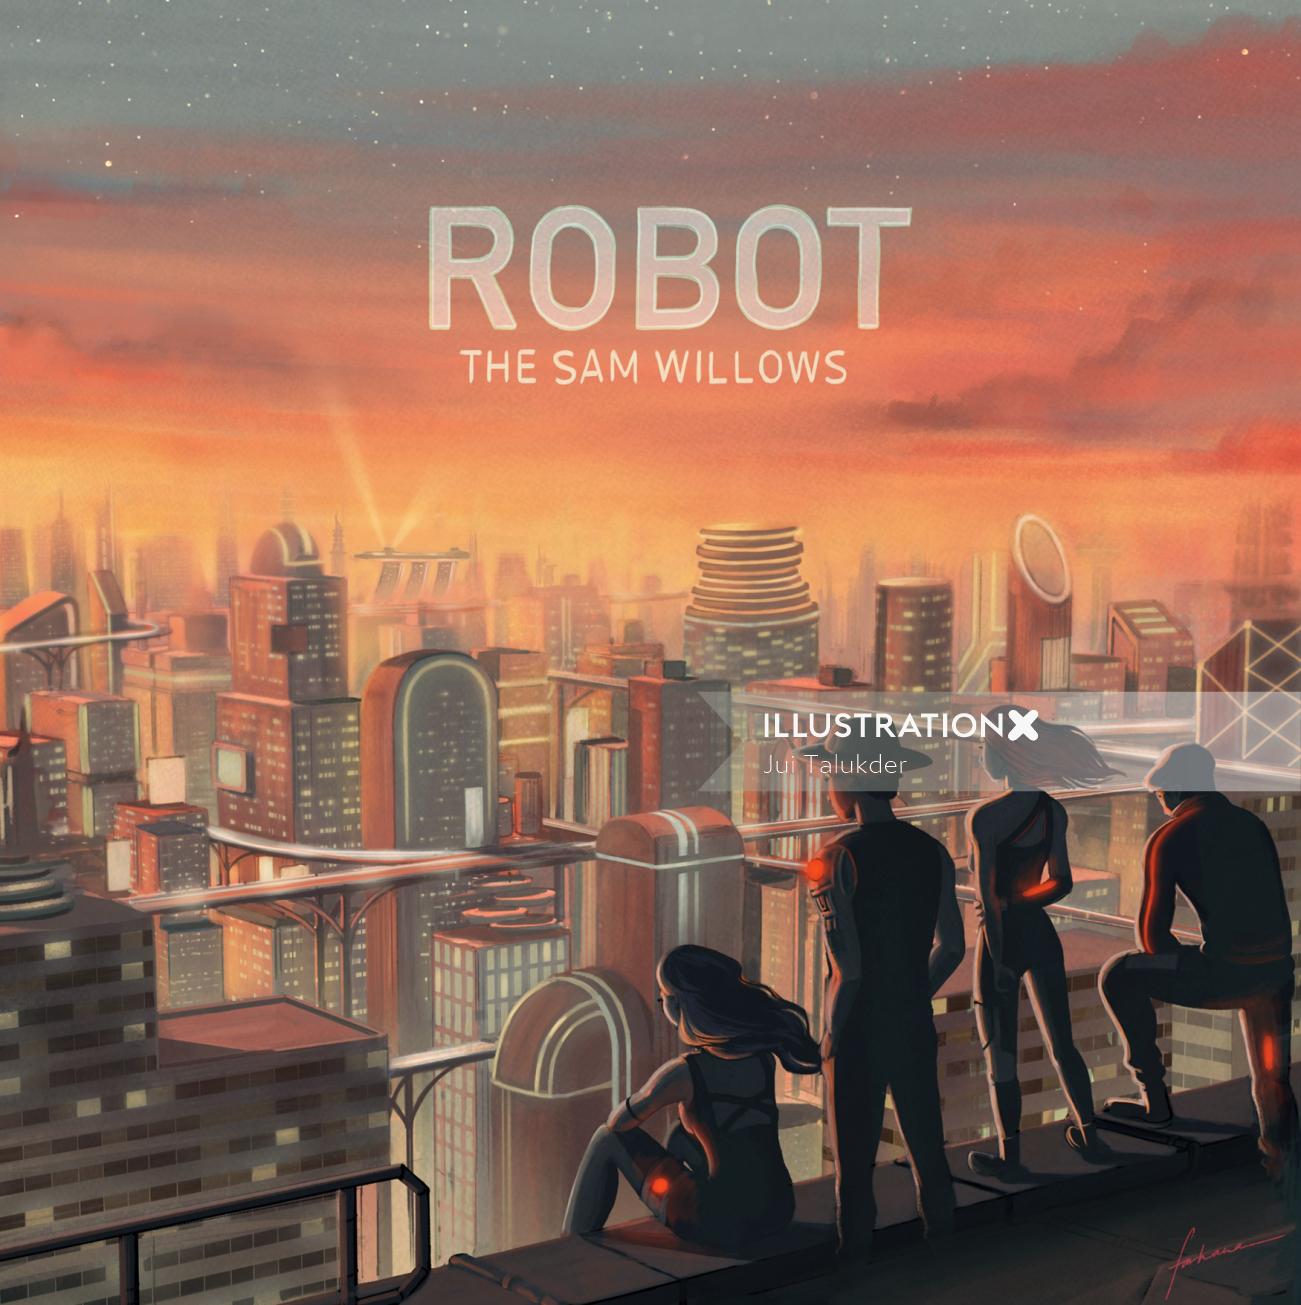 Song cover art for Robot By The Sam Willows